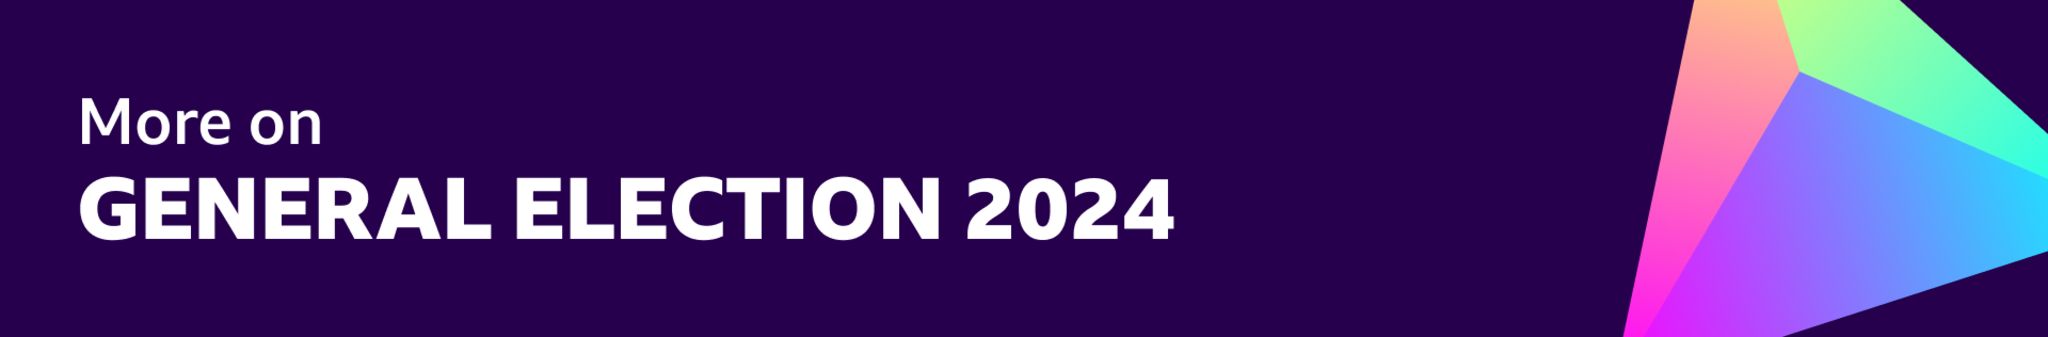 "More on general election 2024" banner